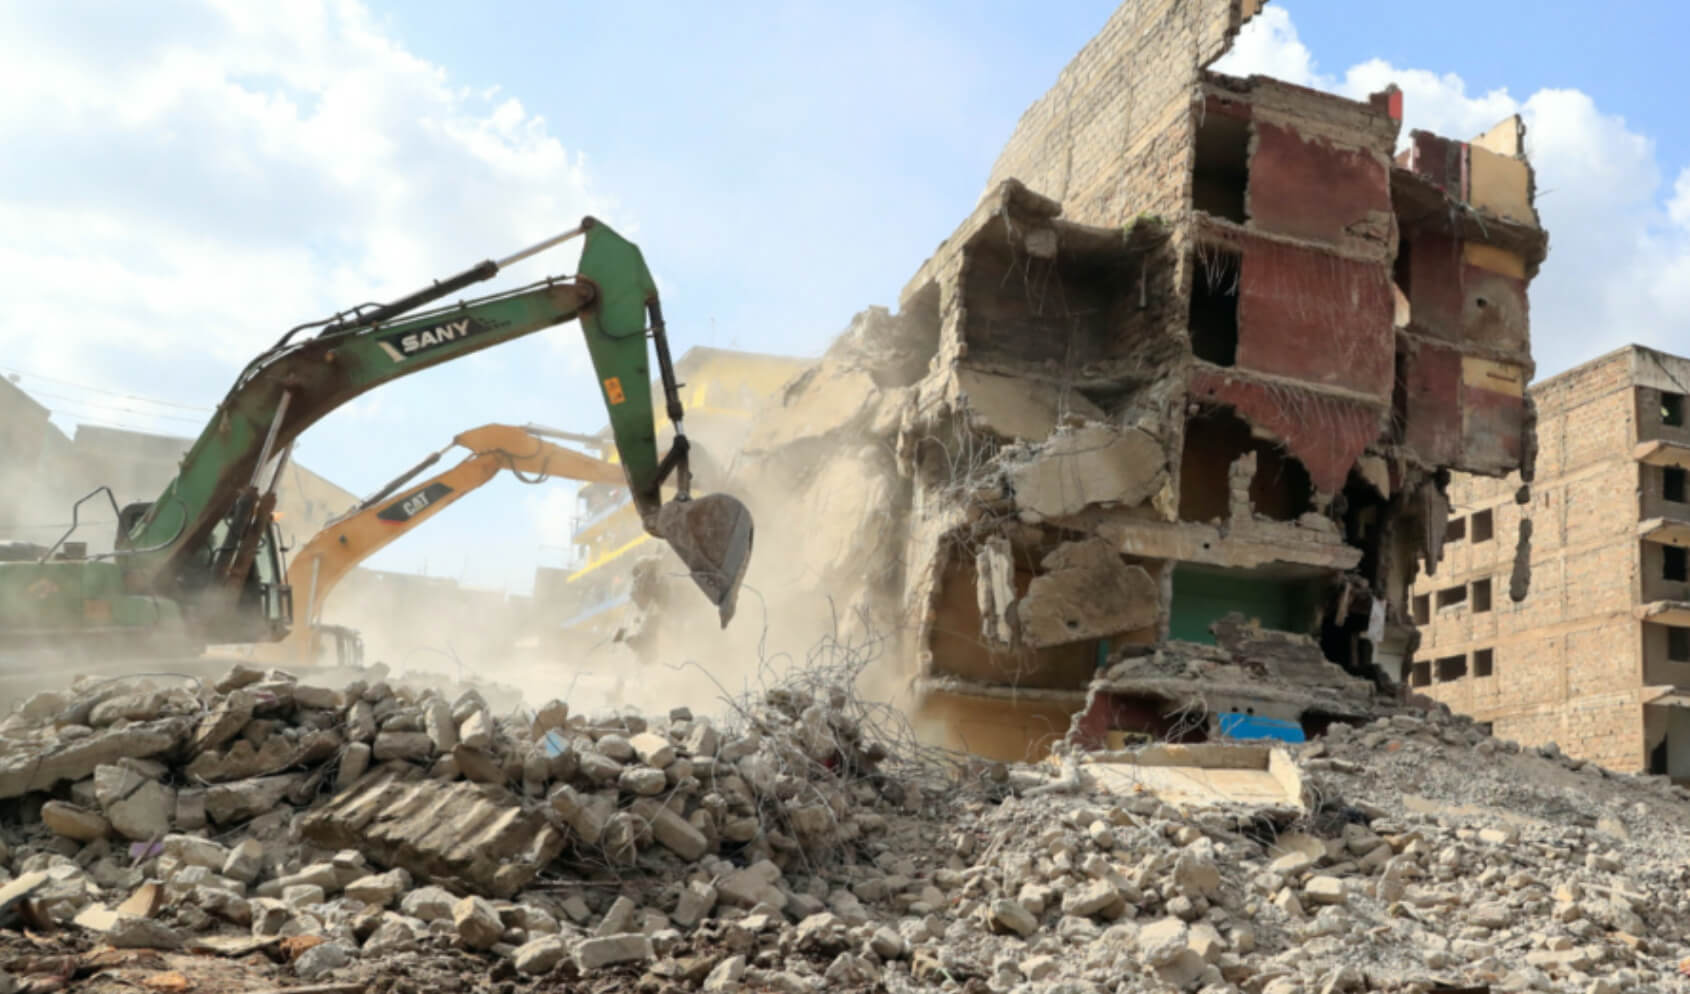 A bulldozer is demolishing a five story building in Mathare that was constructed in a riparian zone